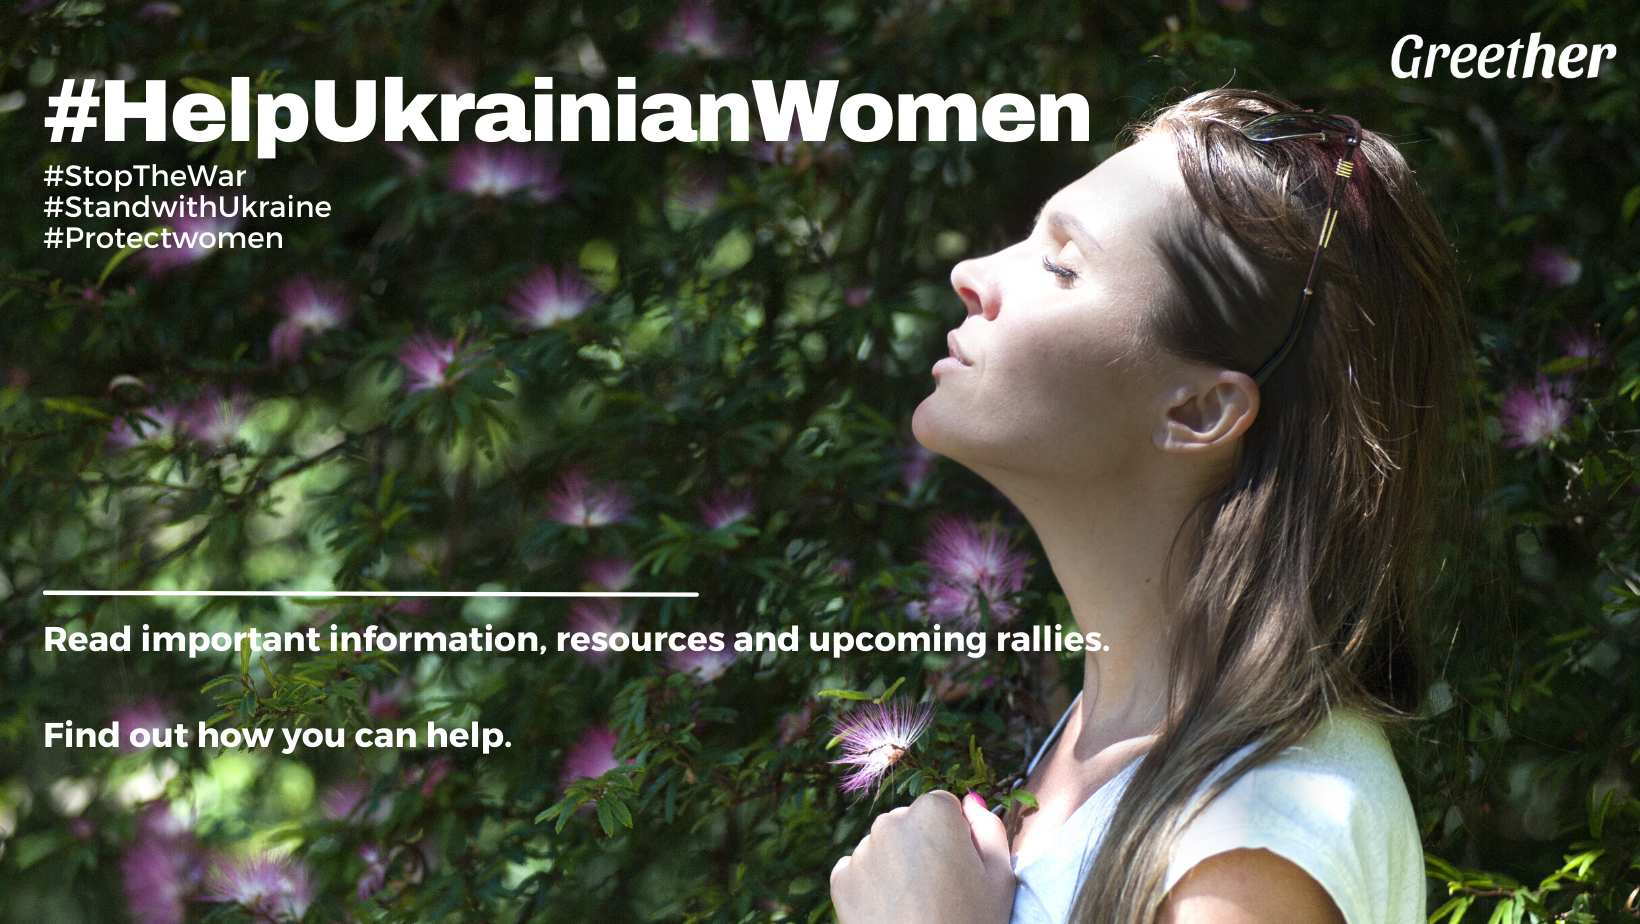 woman hoping for peace in Ukraine, ways to help women. Woman at peace